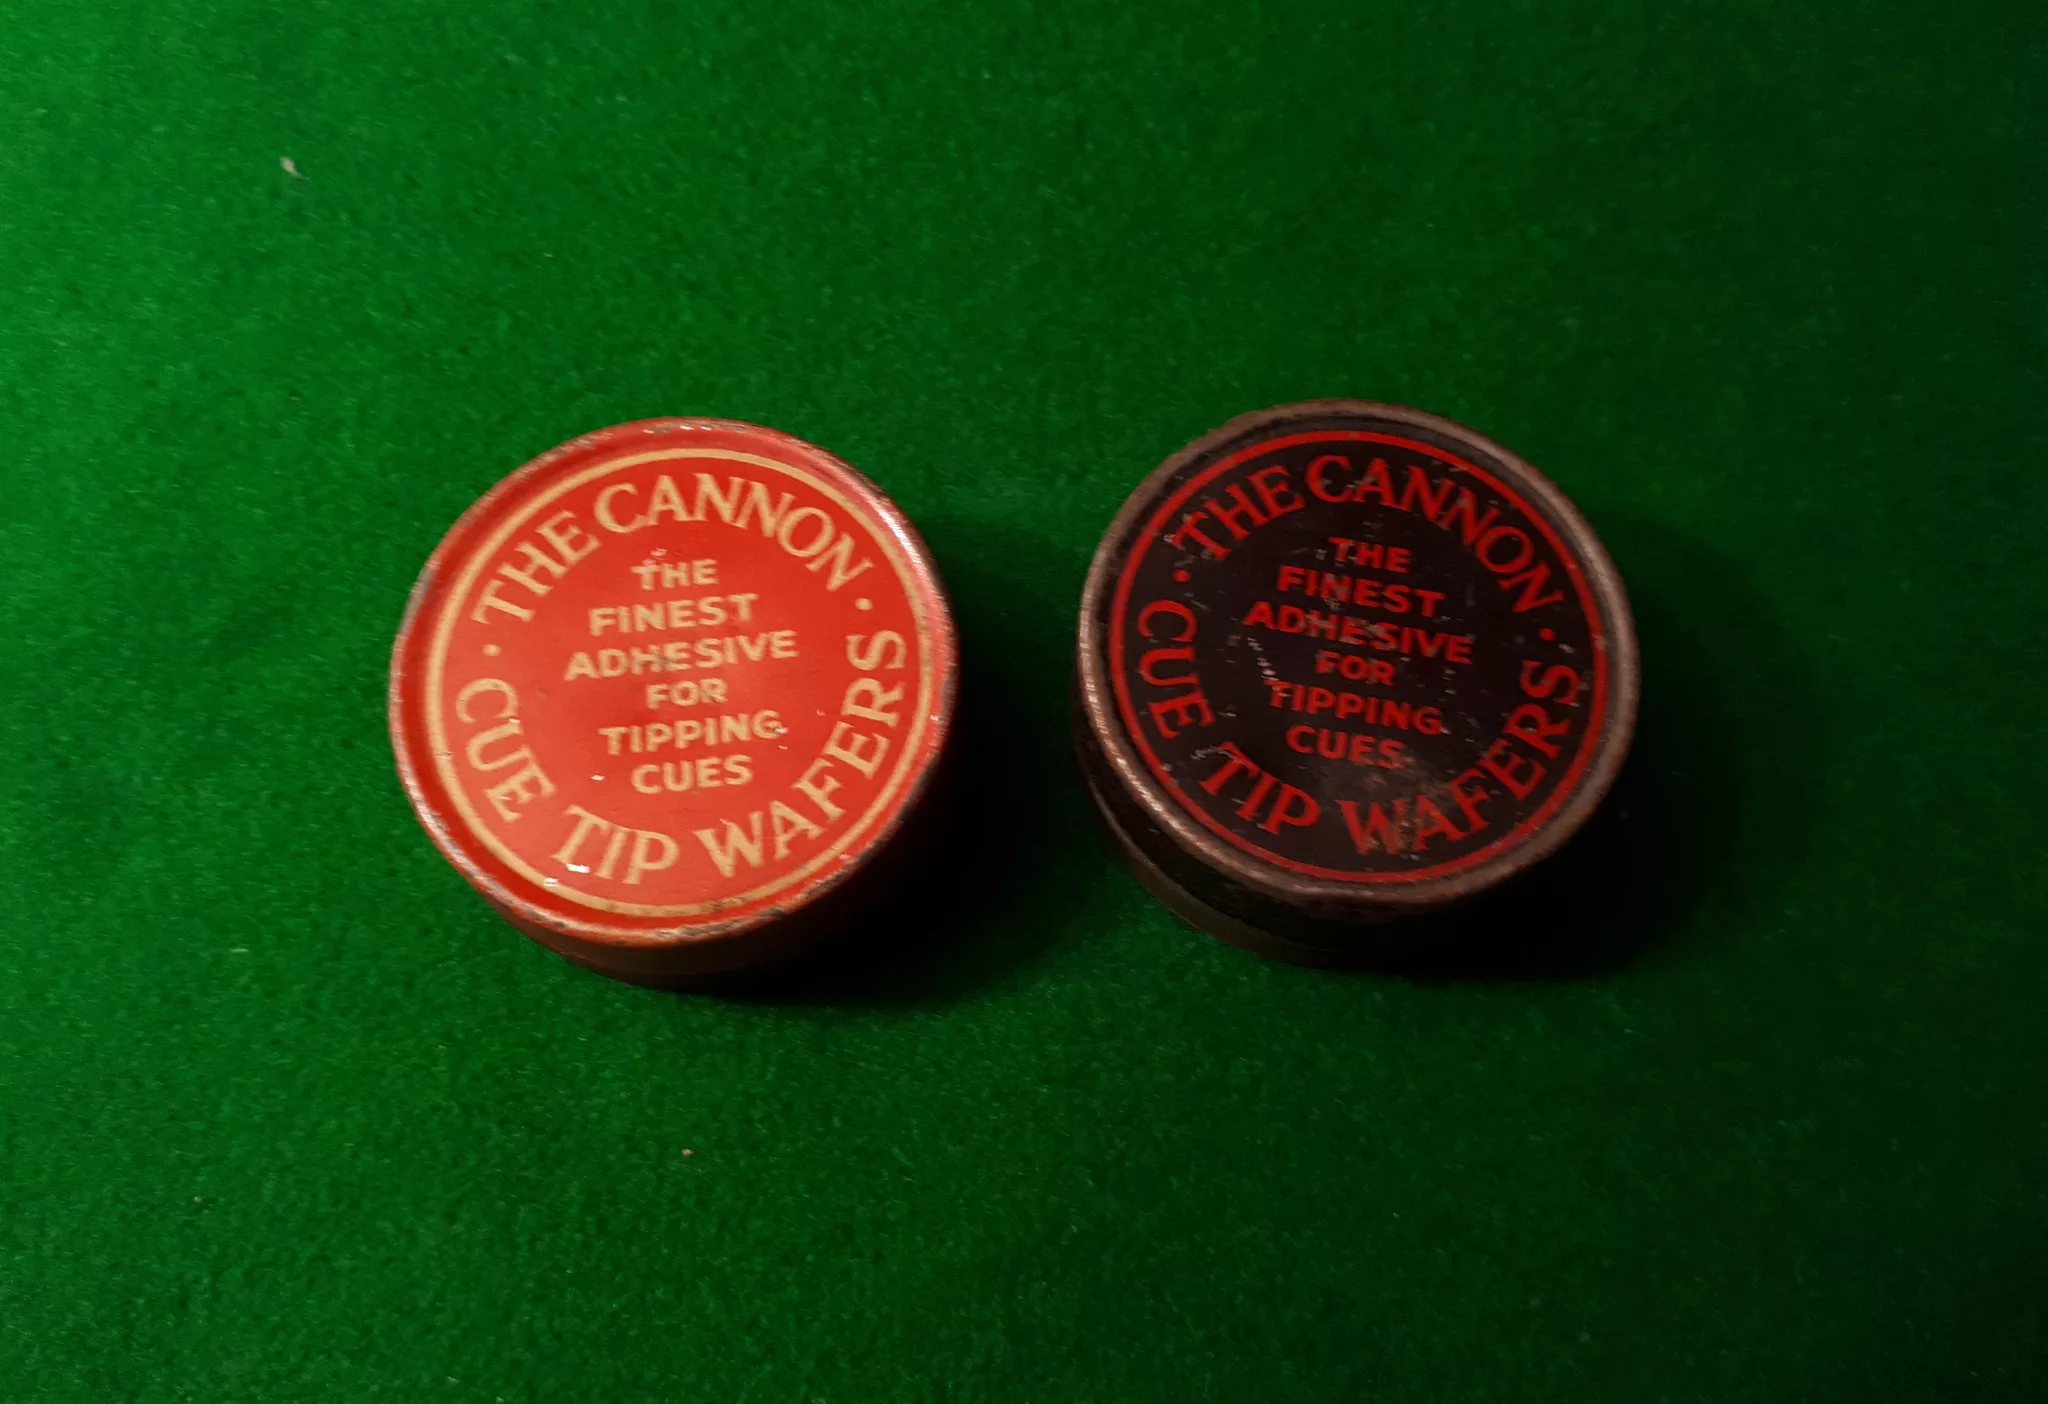 Cannon wafers